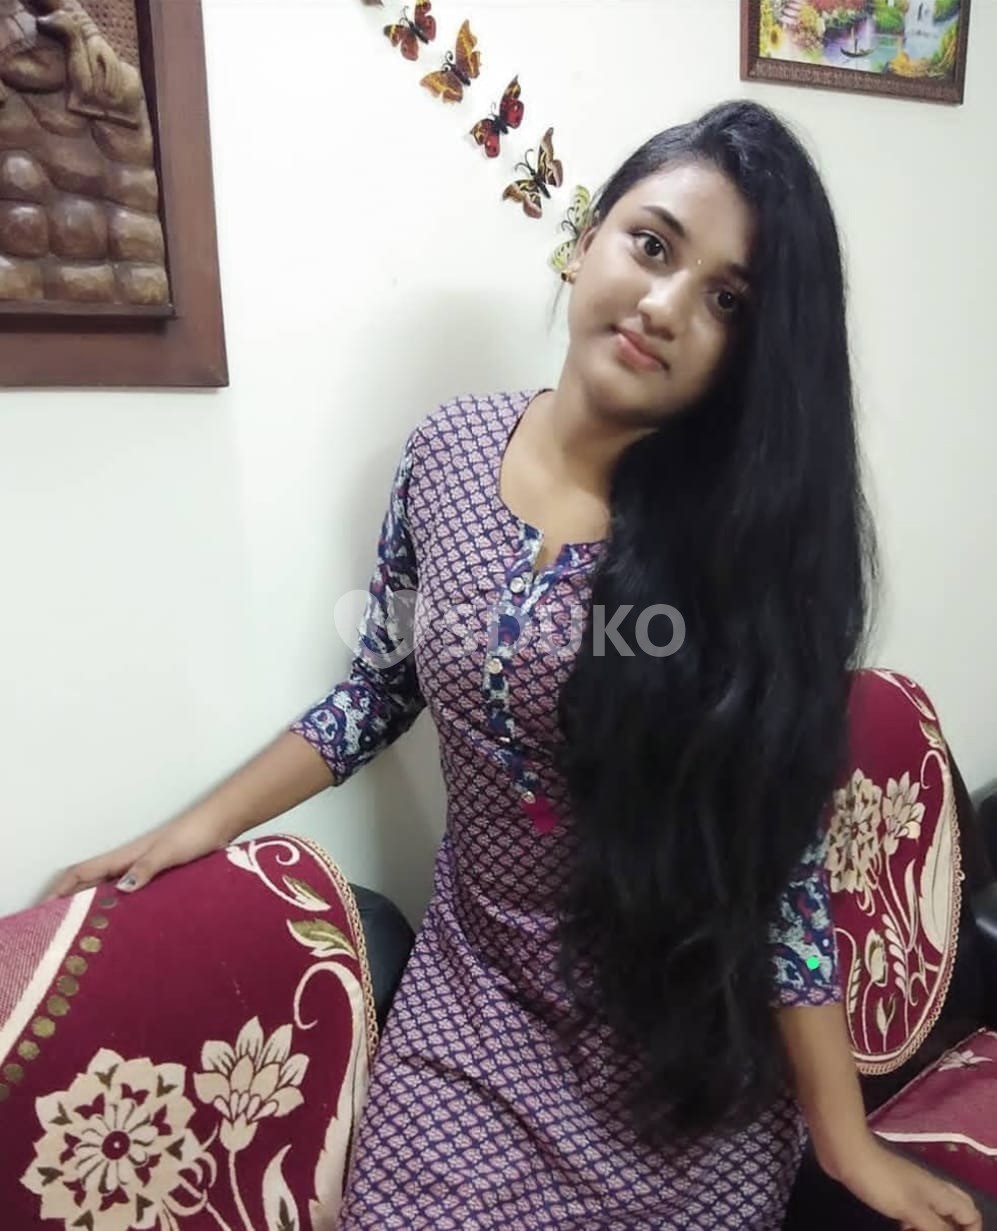 Chittoor..low price 🥰 .100% SAFE AND SECURE TODAY LOW PRICE UNLIMITED ENJOY HOT COLLEGE GIRL HOUSEWIFE AUNTIES AVAILA